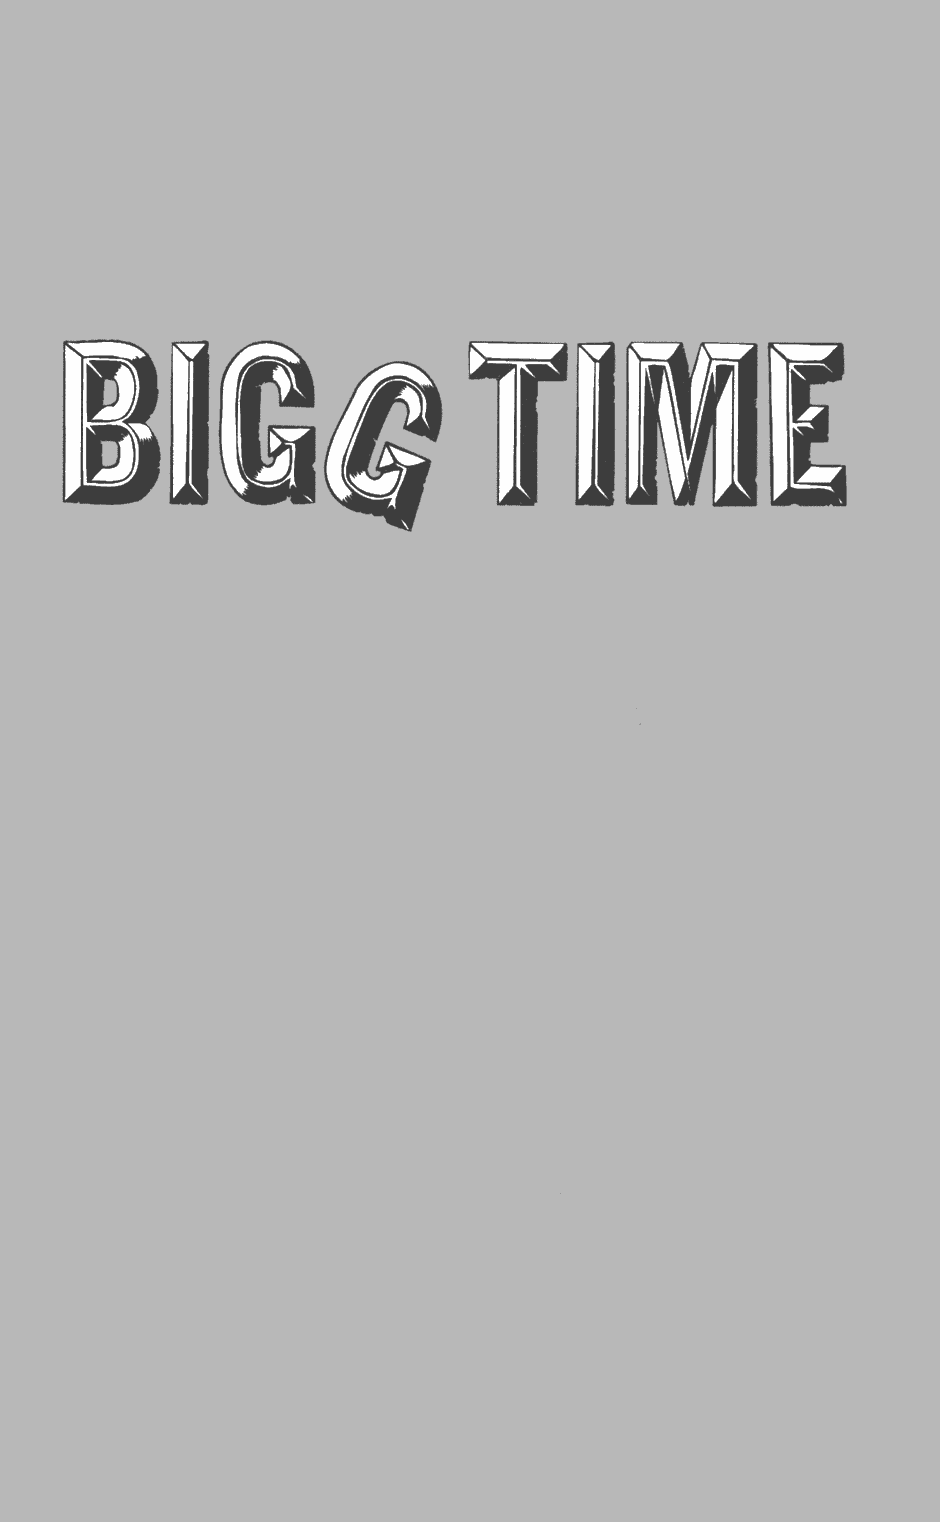 Read online Bigg Time comic -  Issue # TPB - 2